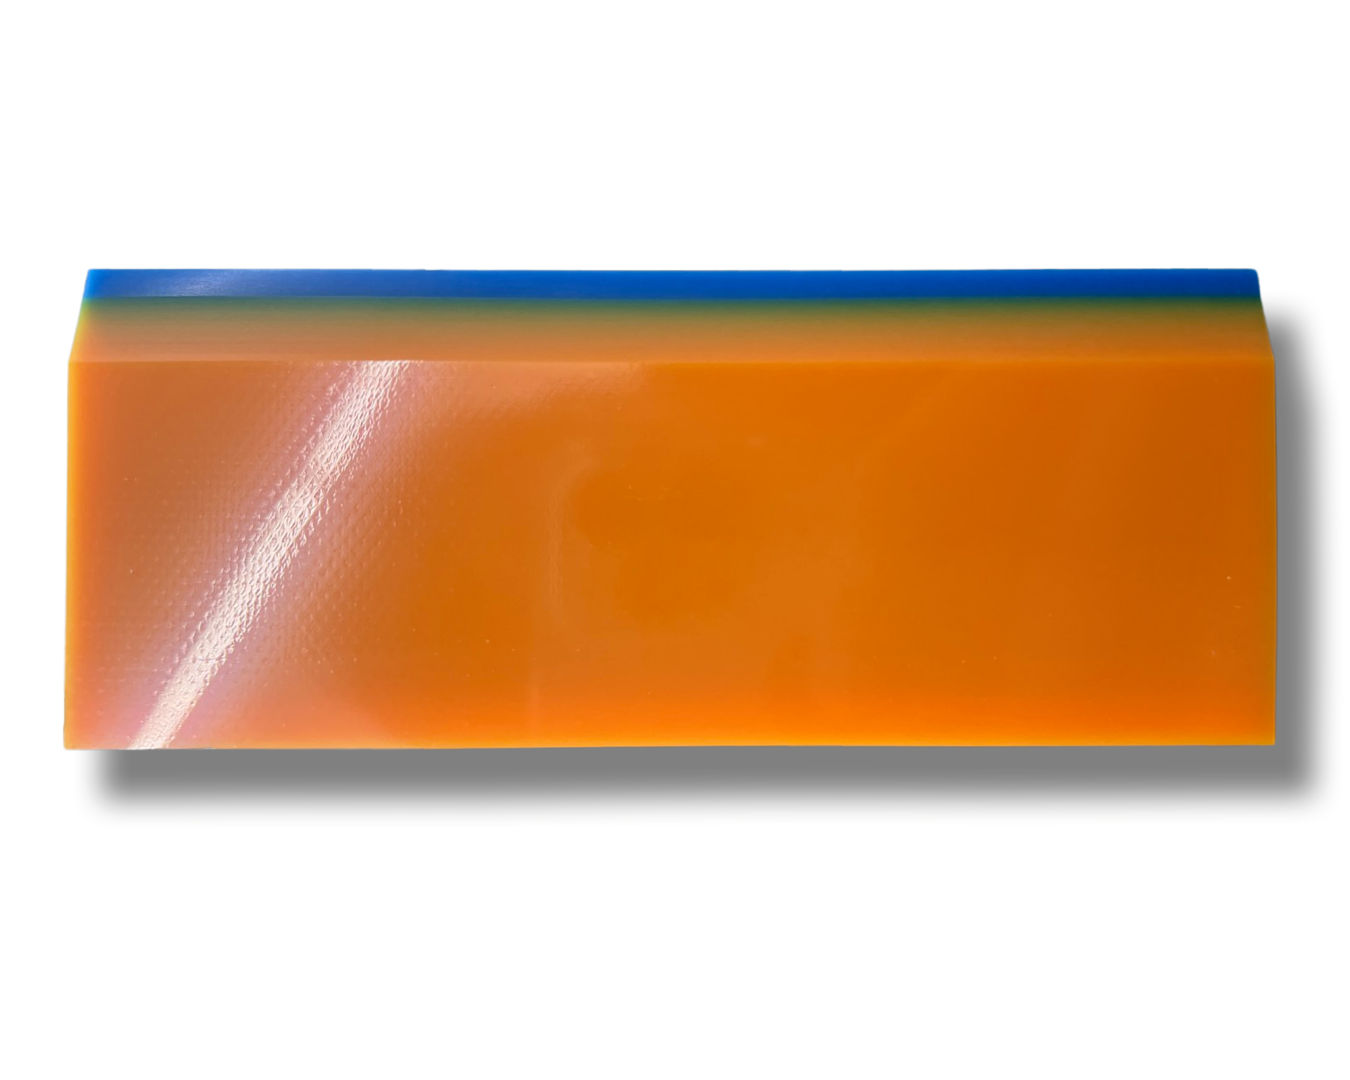 BEST Hybrid Squeegee Blade by Fusion